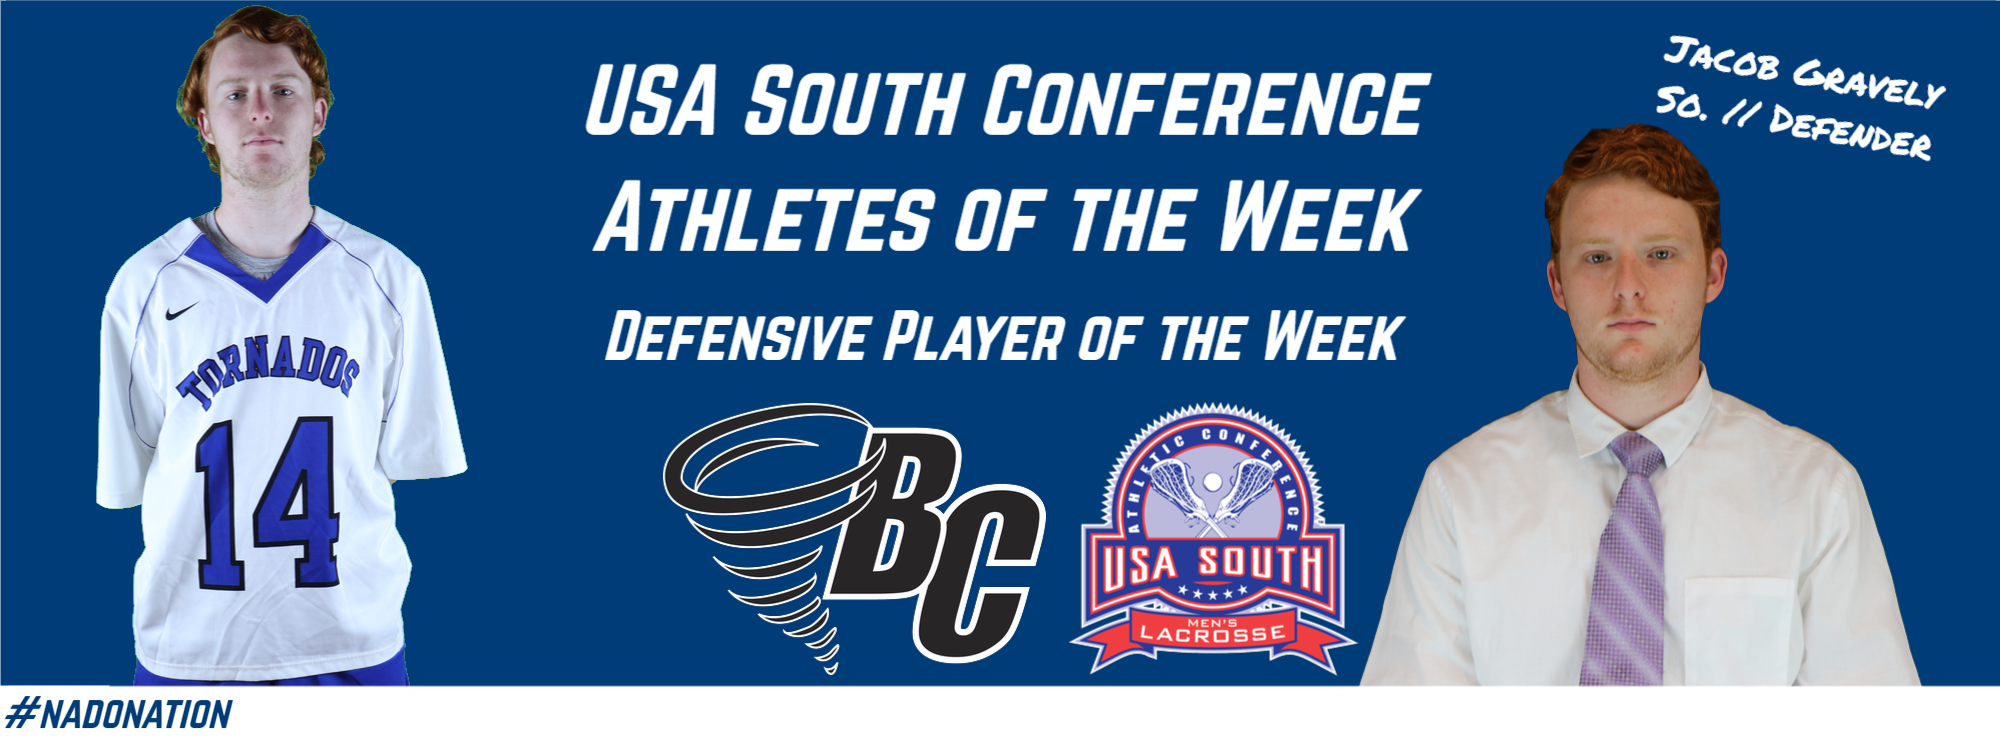 Gravely Selected as USA South Defensive Player of the Week